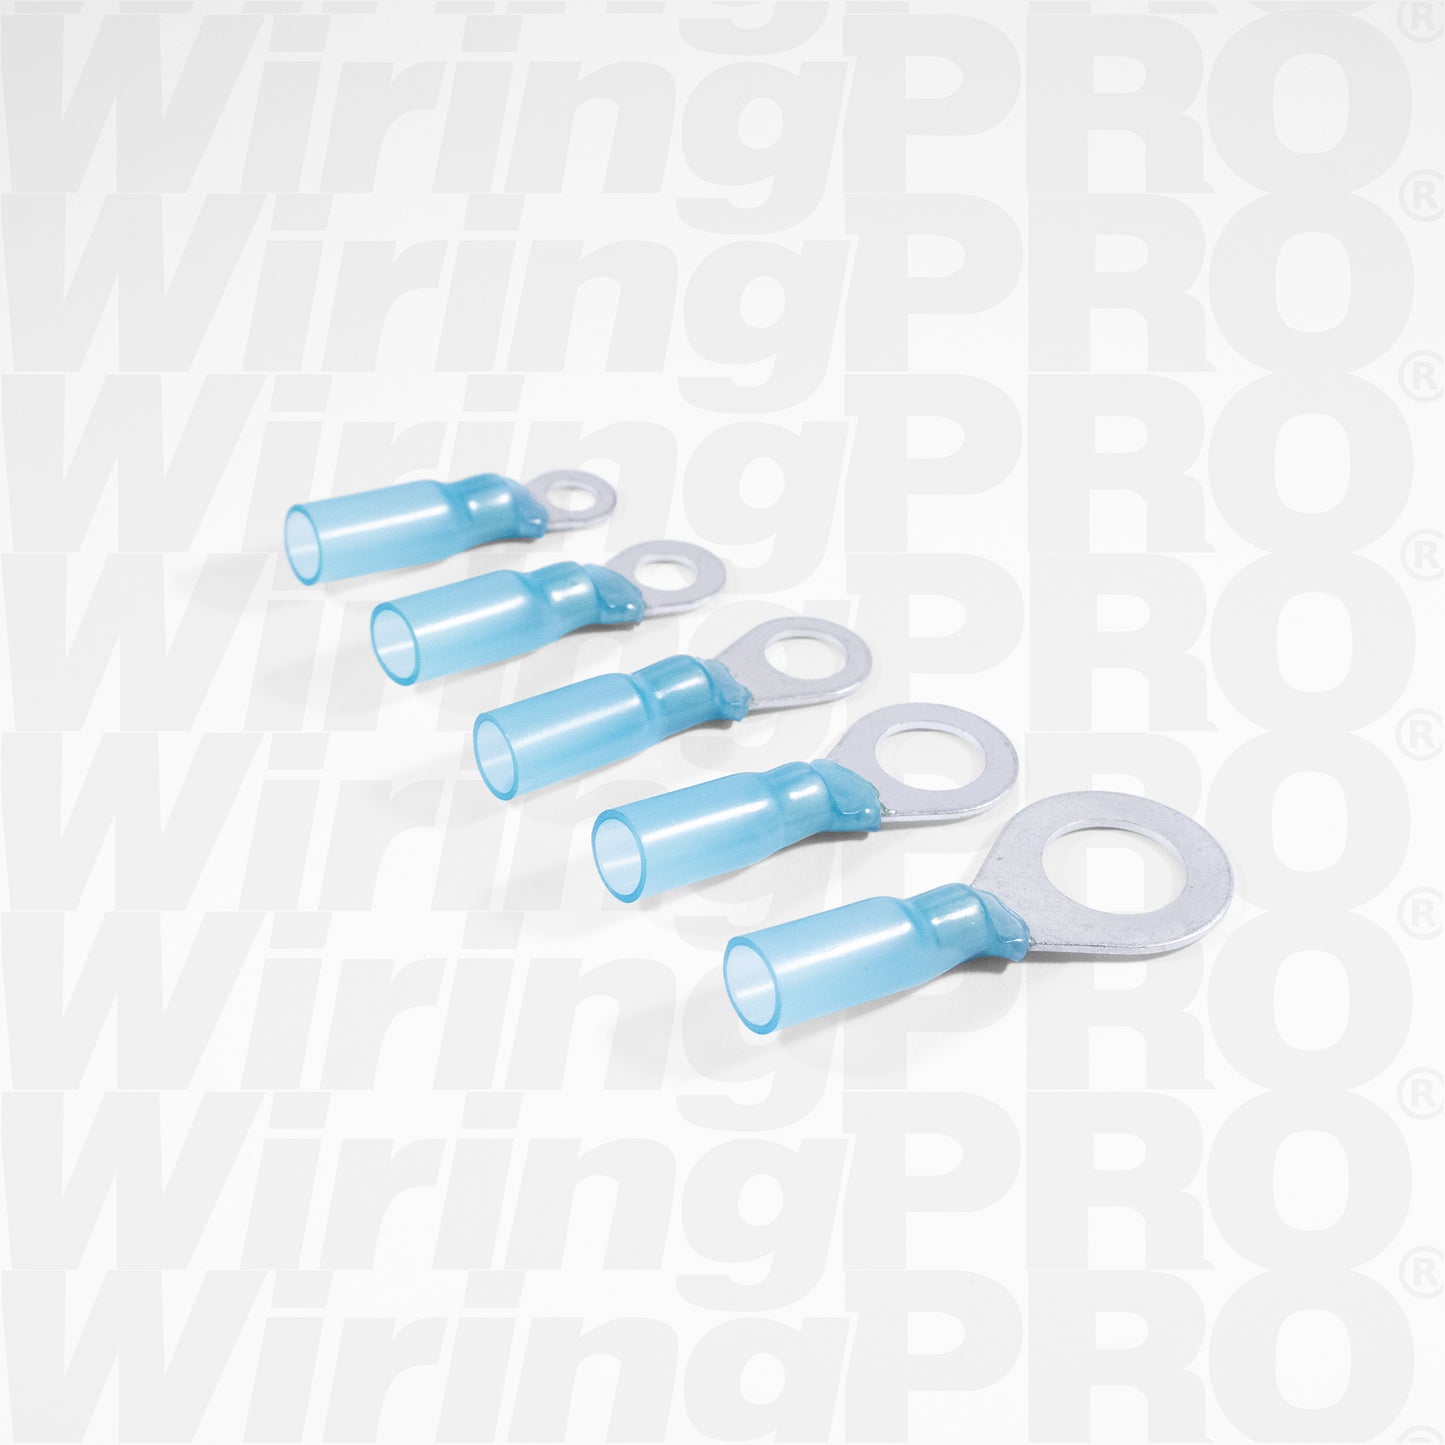 12-10 Ring Terminals - Heat Shrinkable